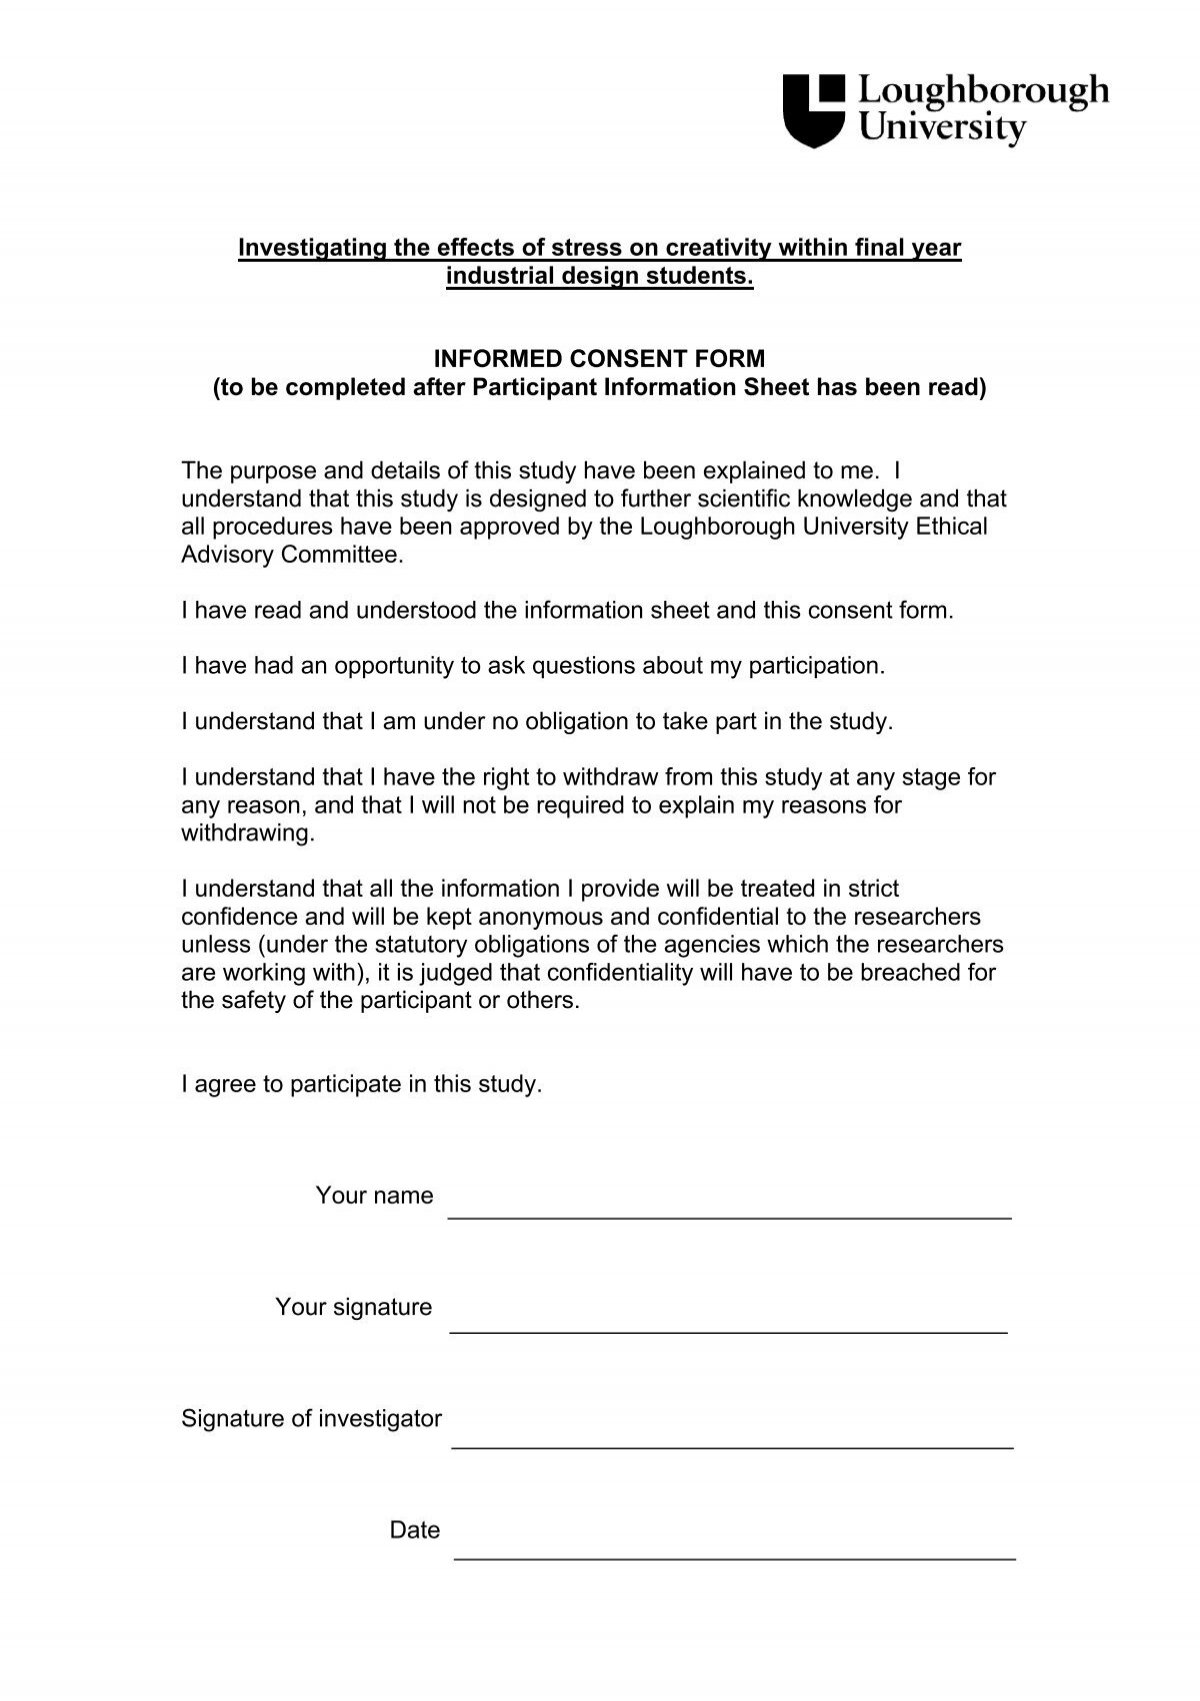 assignment consent form